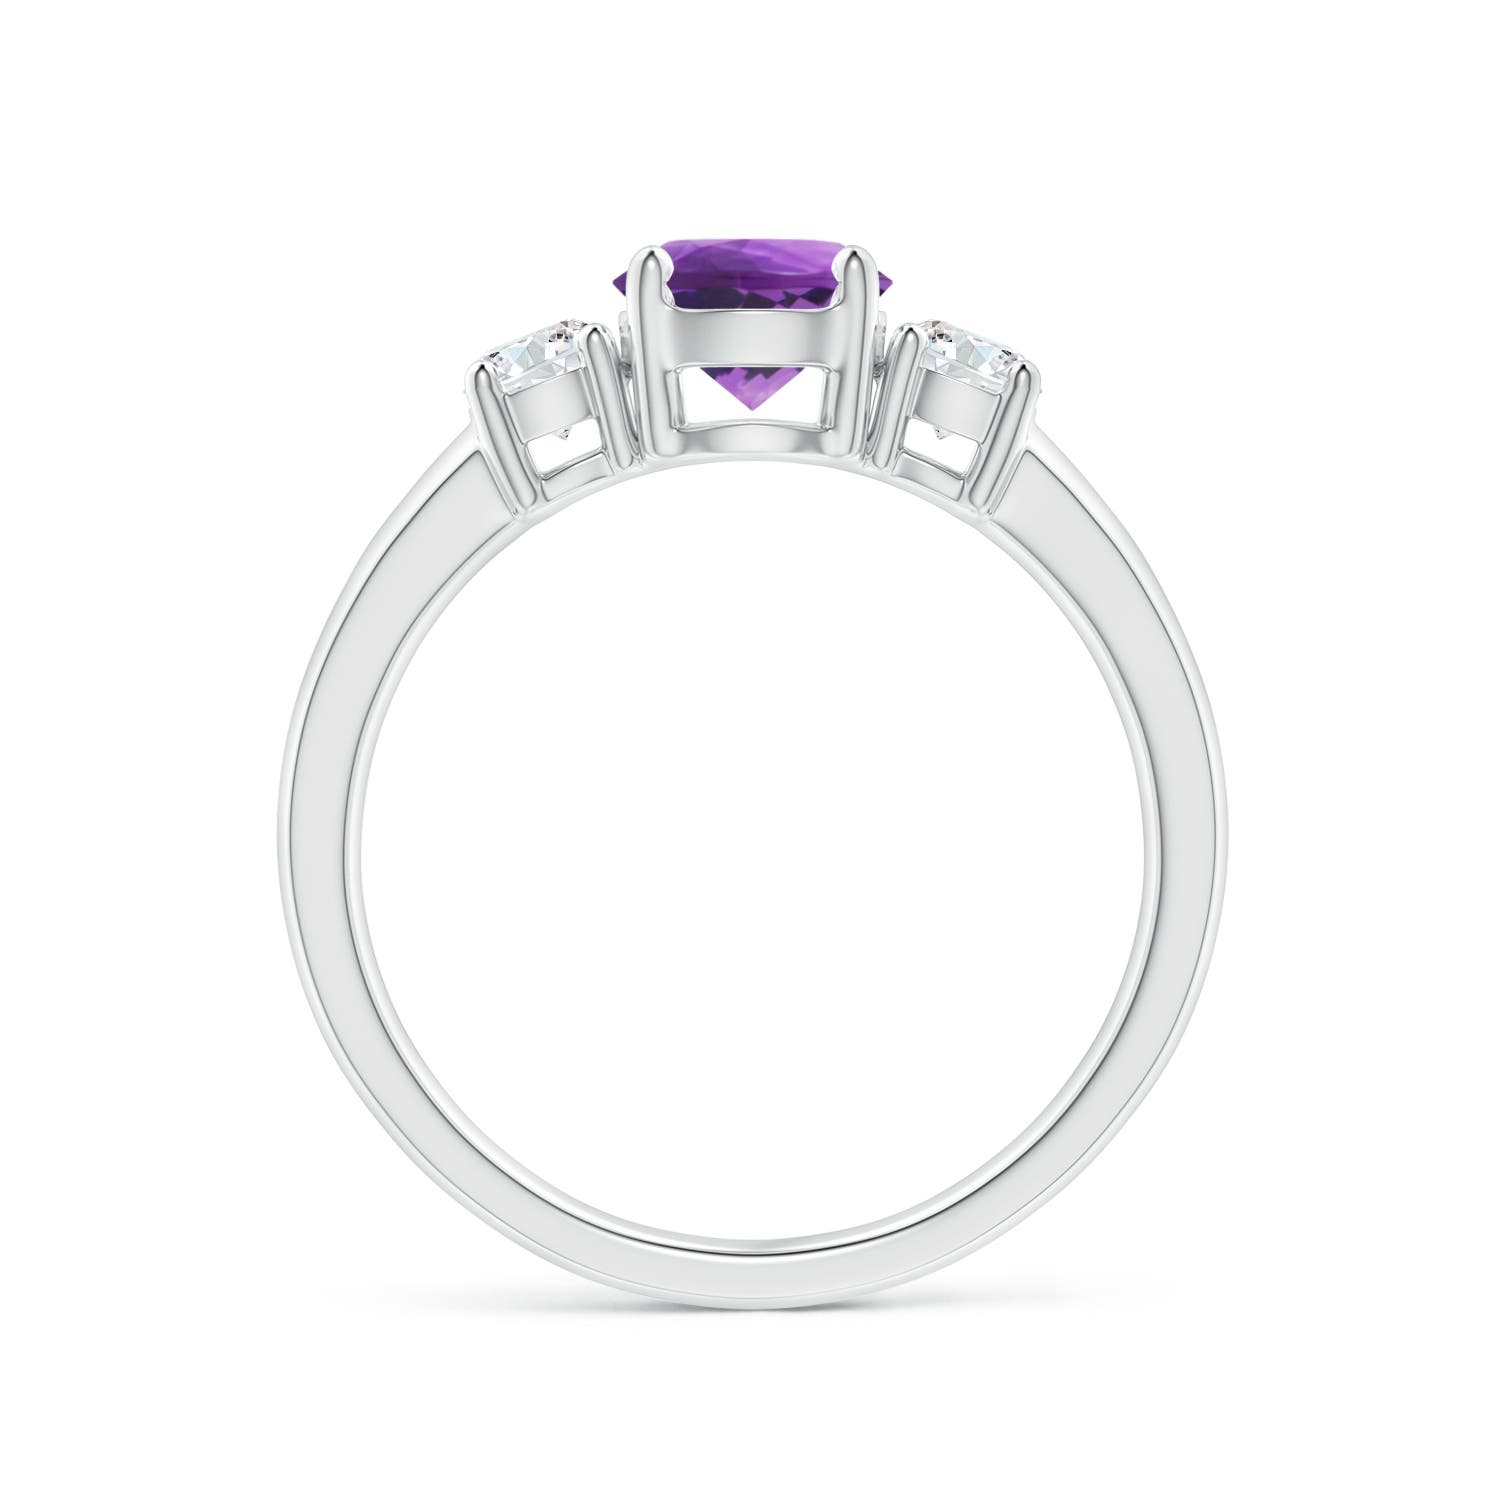 AAA - Amethyst / 1.12 CT / 14 KT White Gold